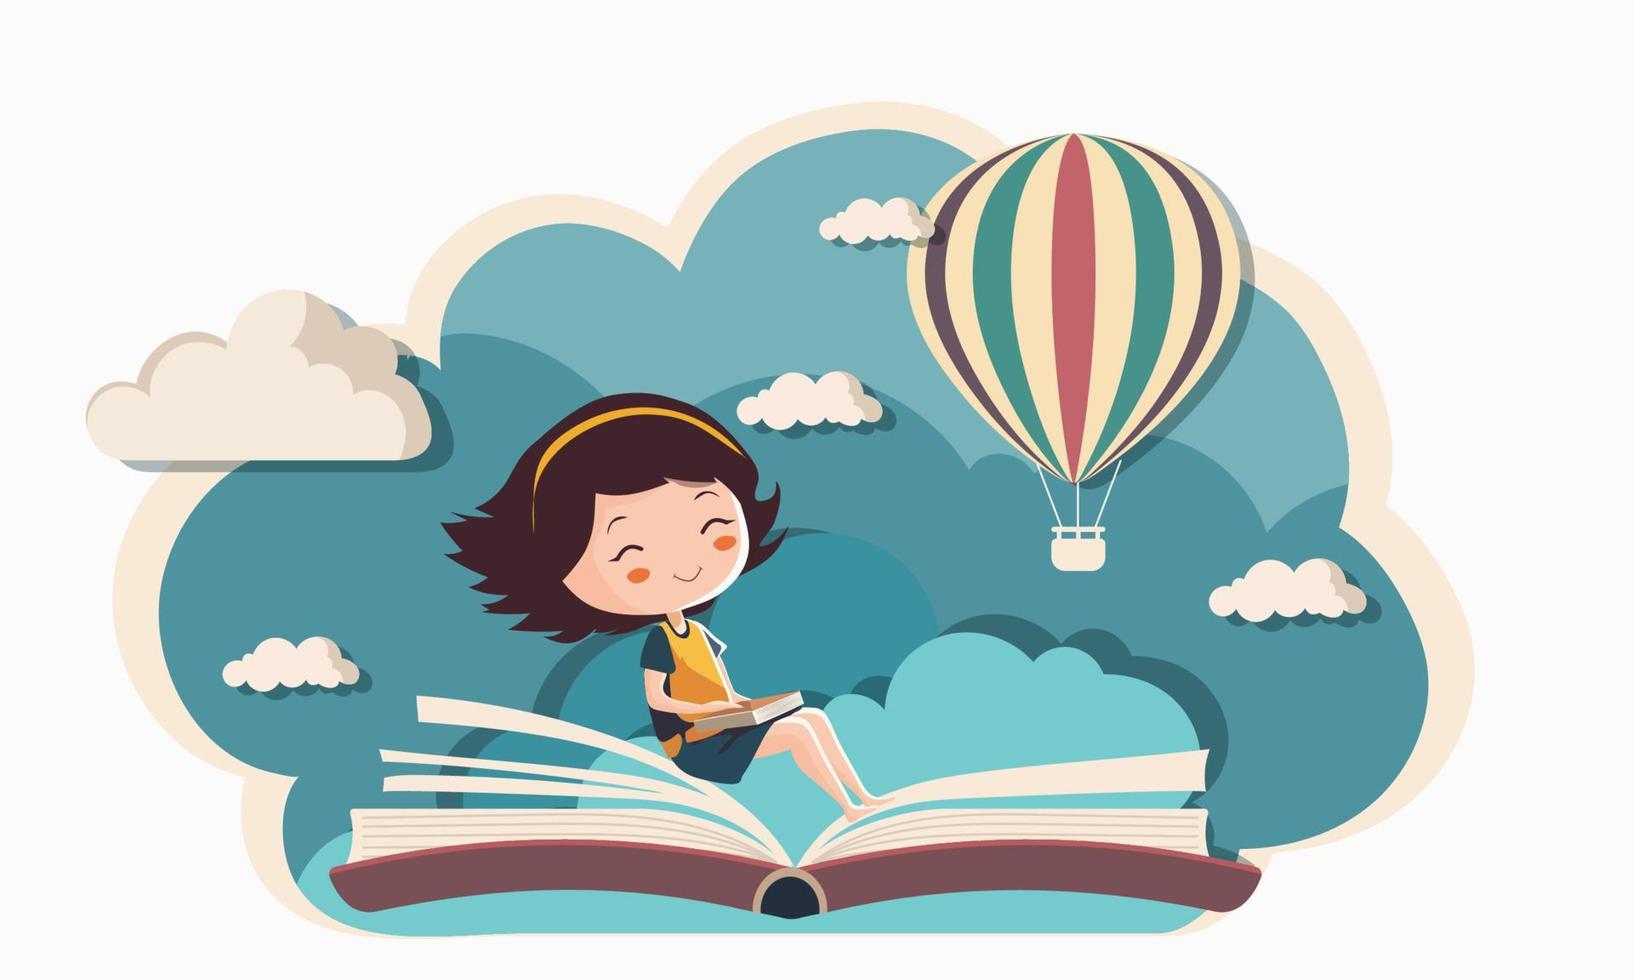 Cute Girl Character Sitting On Open Book With Hot Air Balloon On Clouds Background. vector